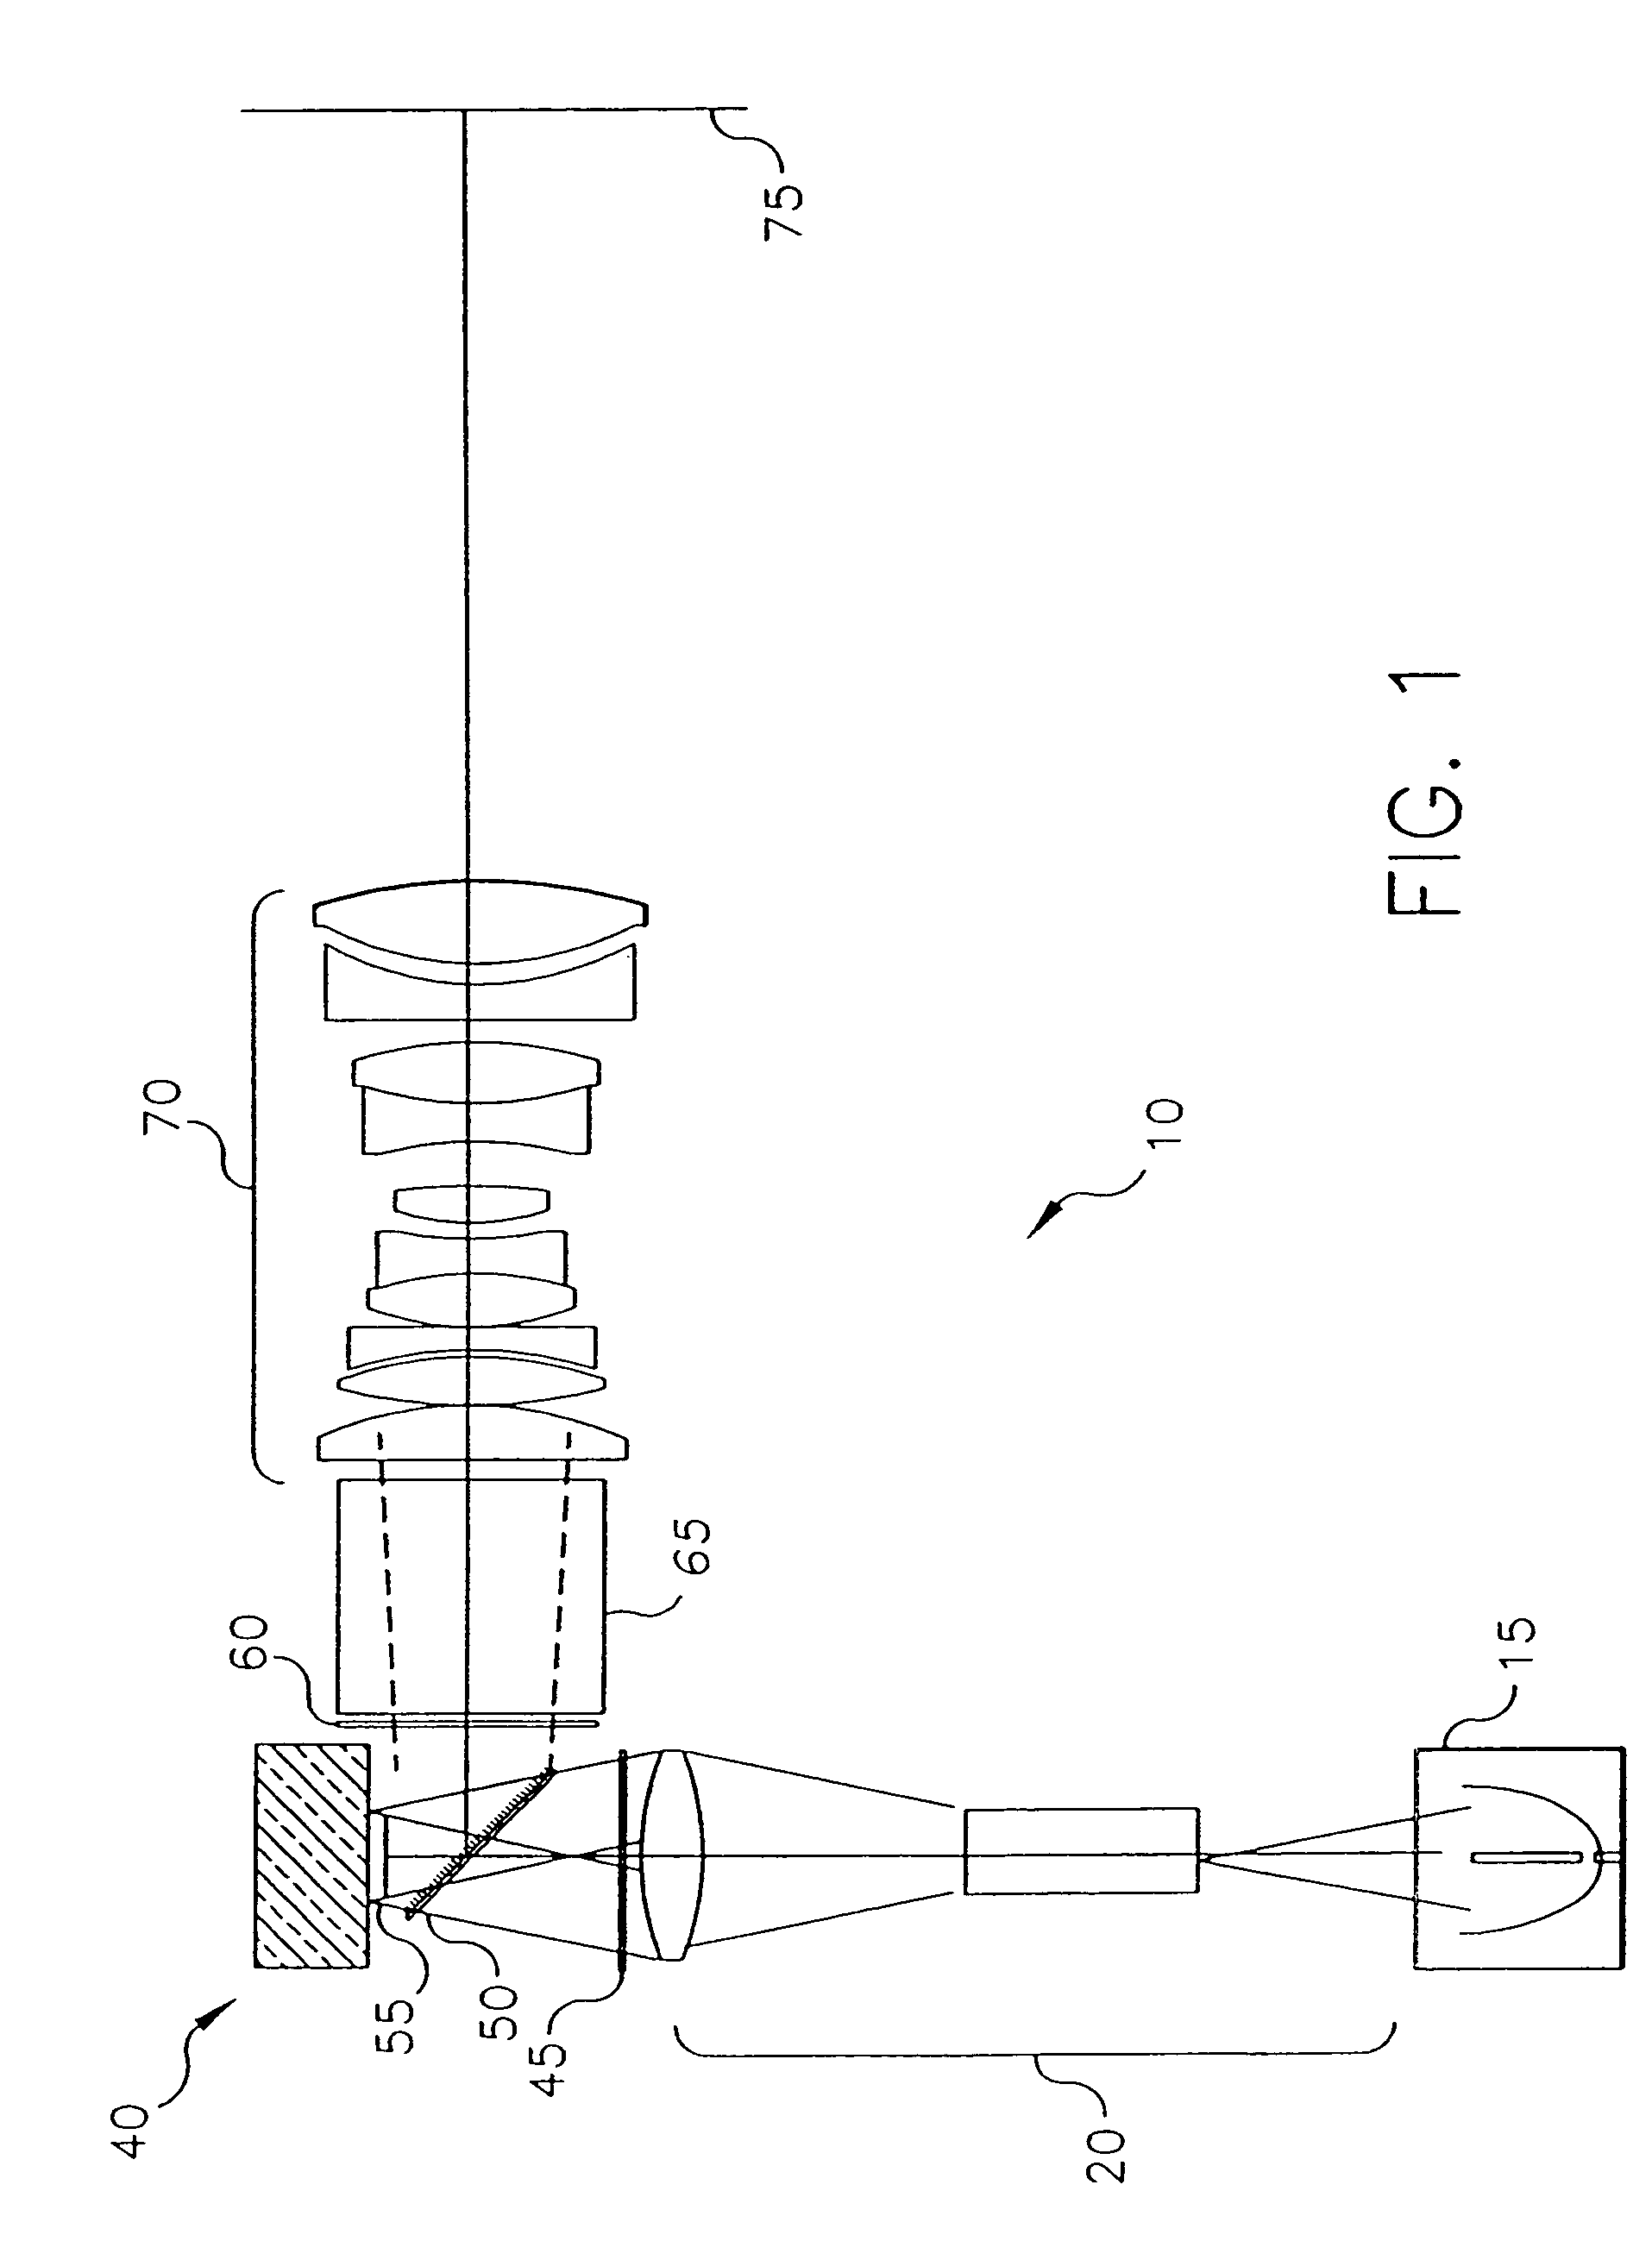 Housing for mounting a beamsplitter and a spatial light modulator with an output optical path